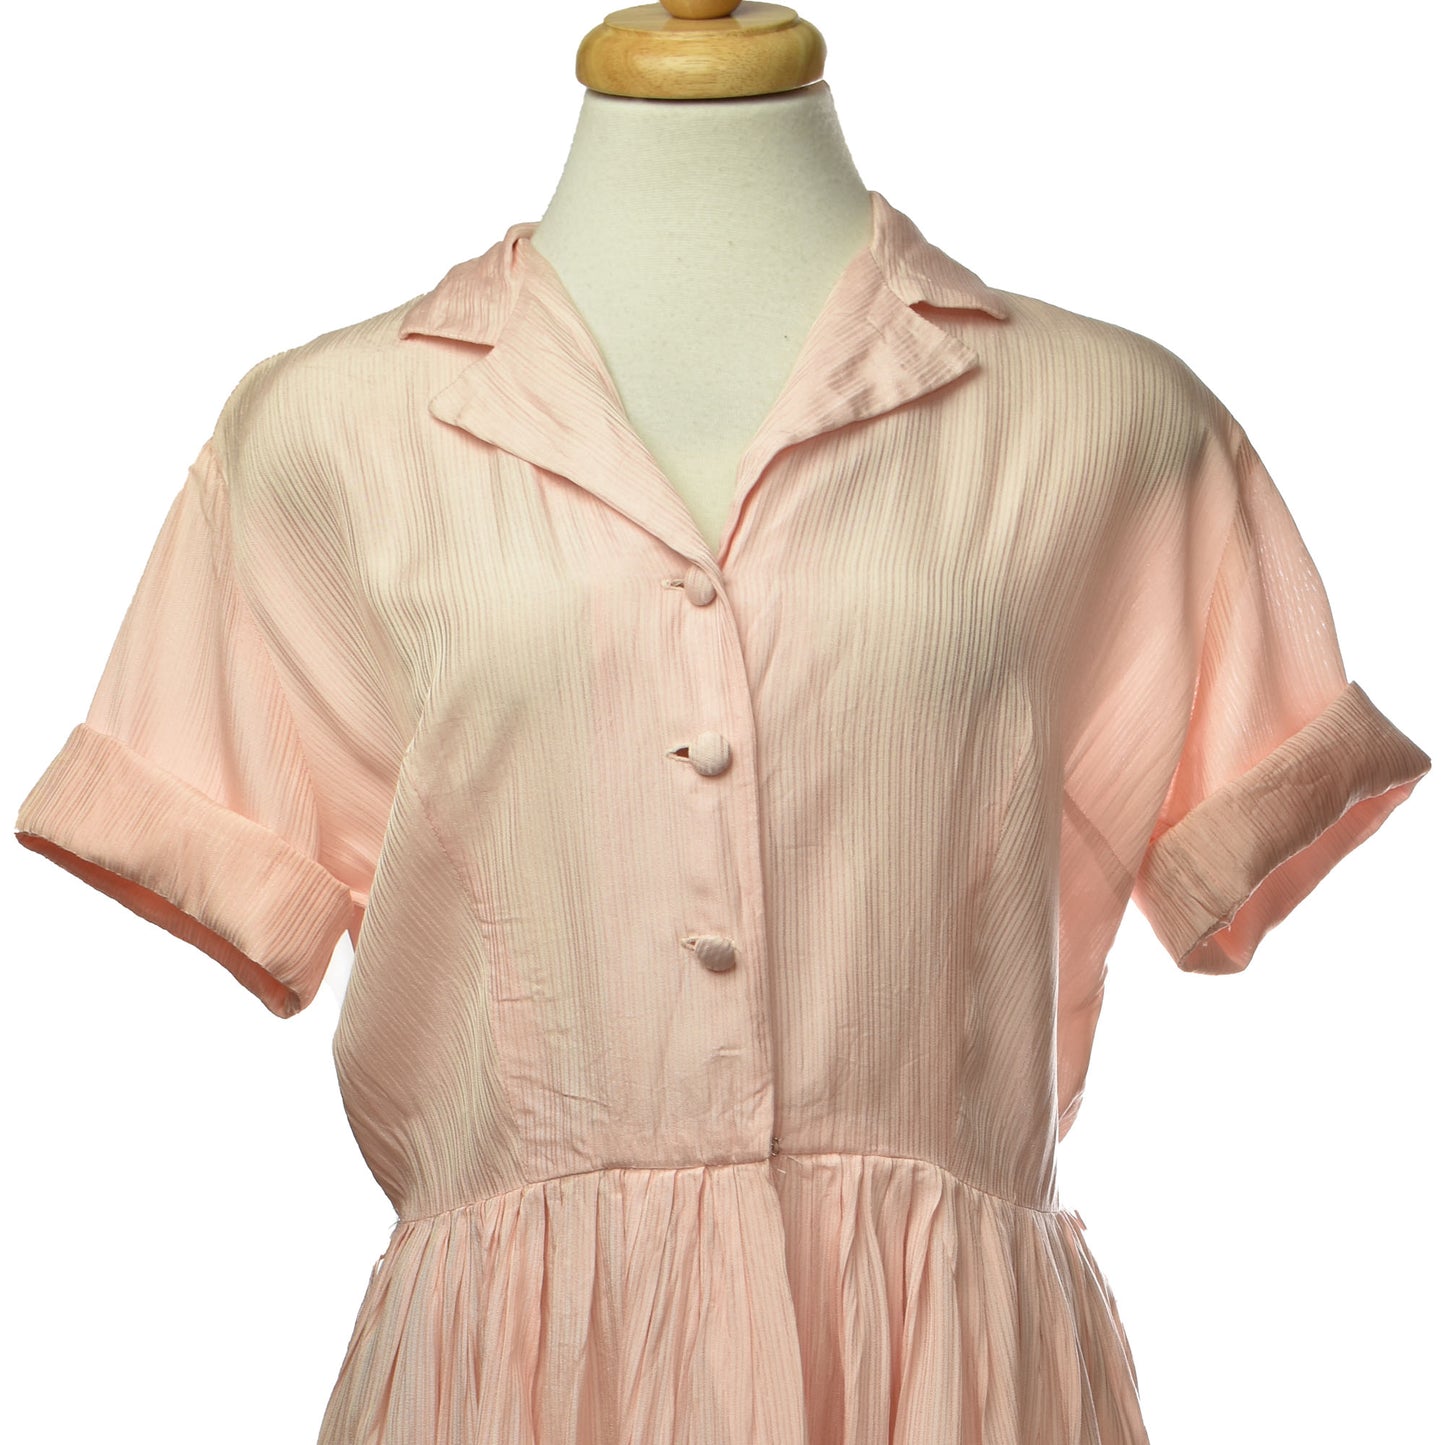 Vintage 50s Baby Pink Button Up Dress with Sheer Back Panel & Criss Cross Detail